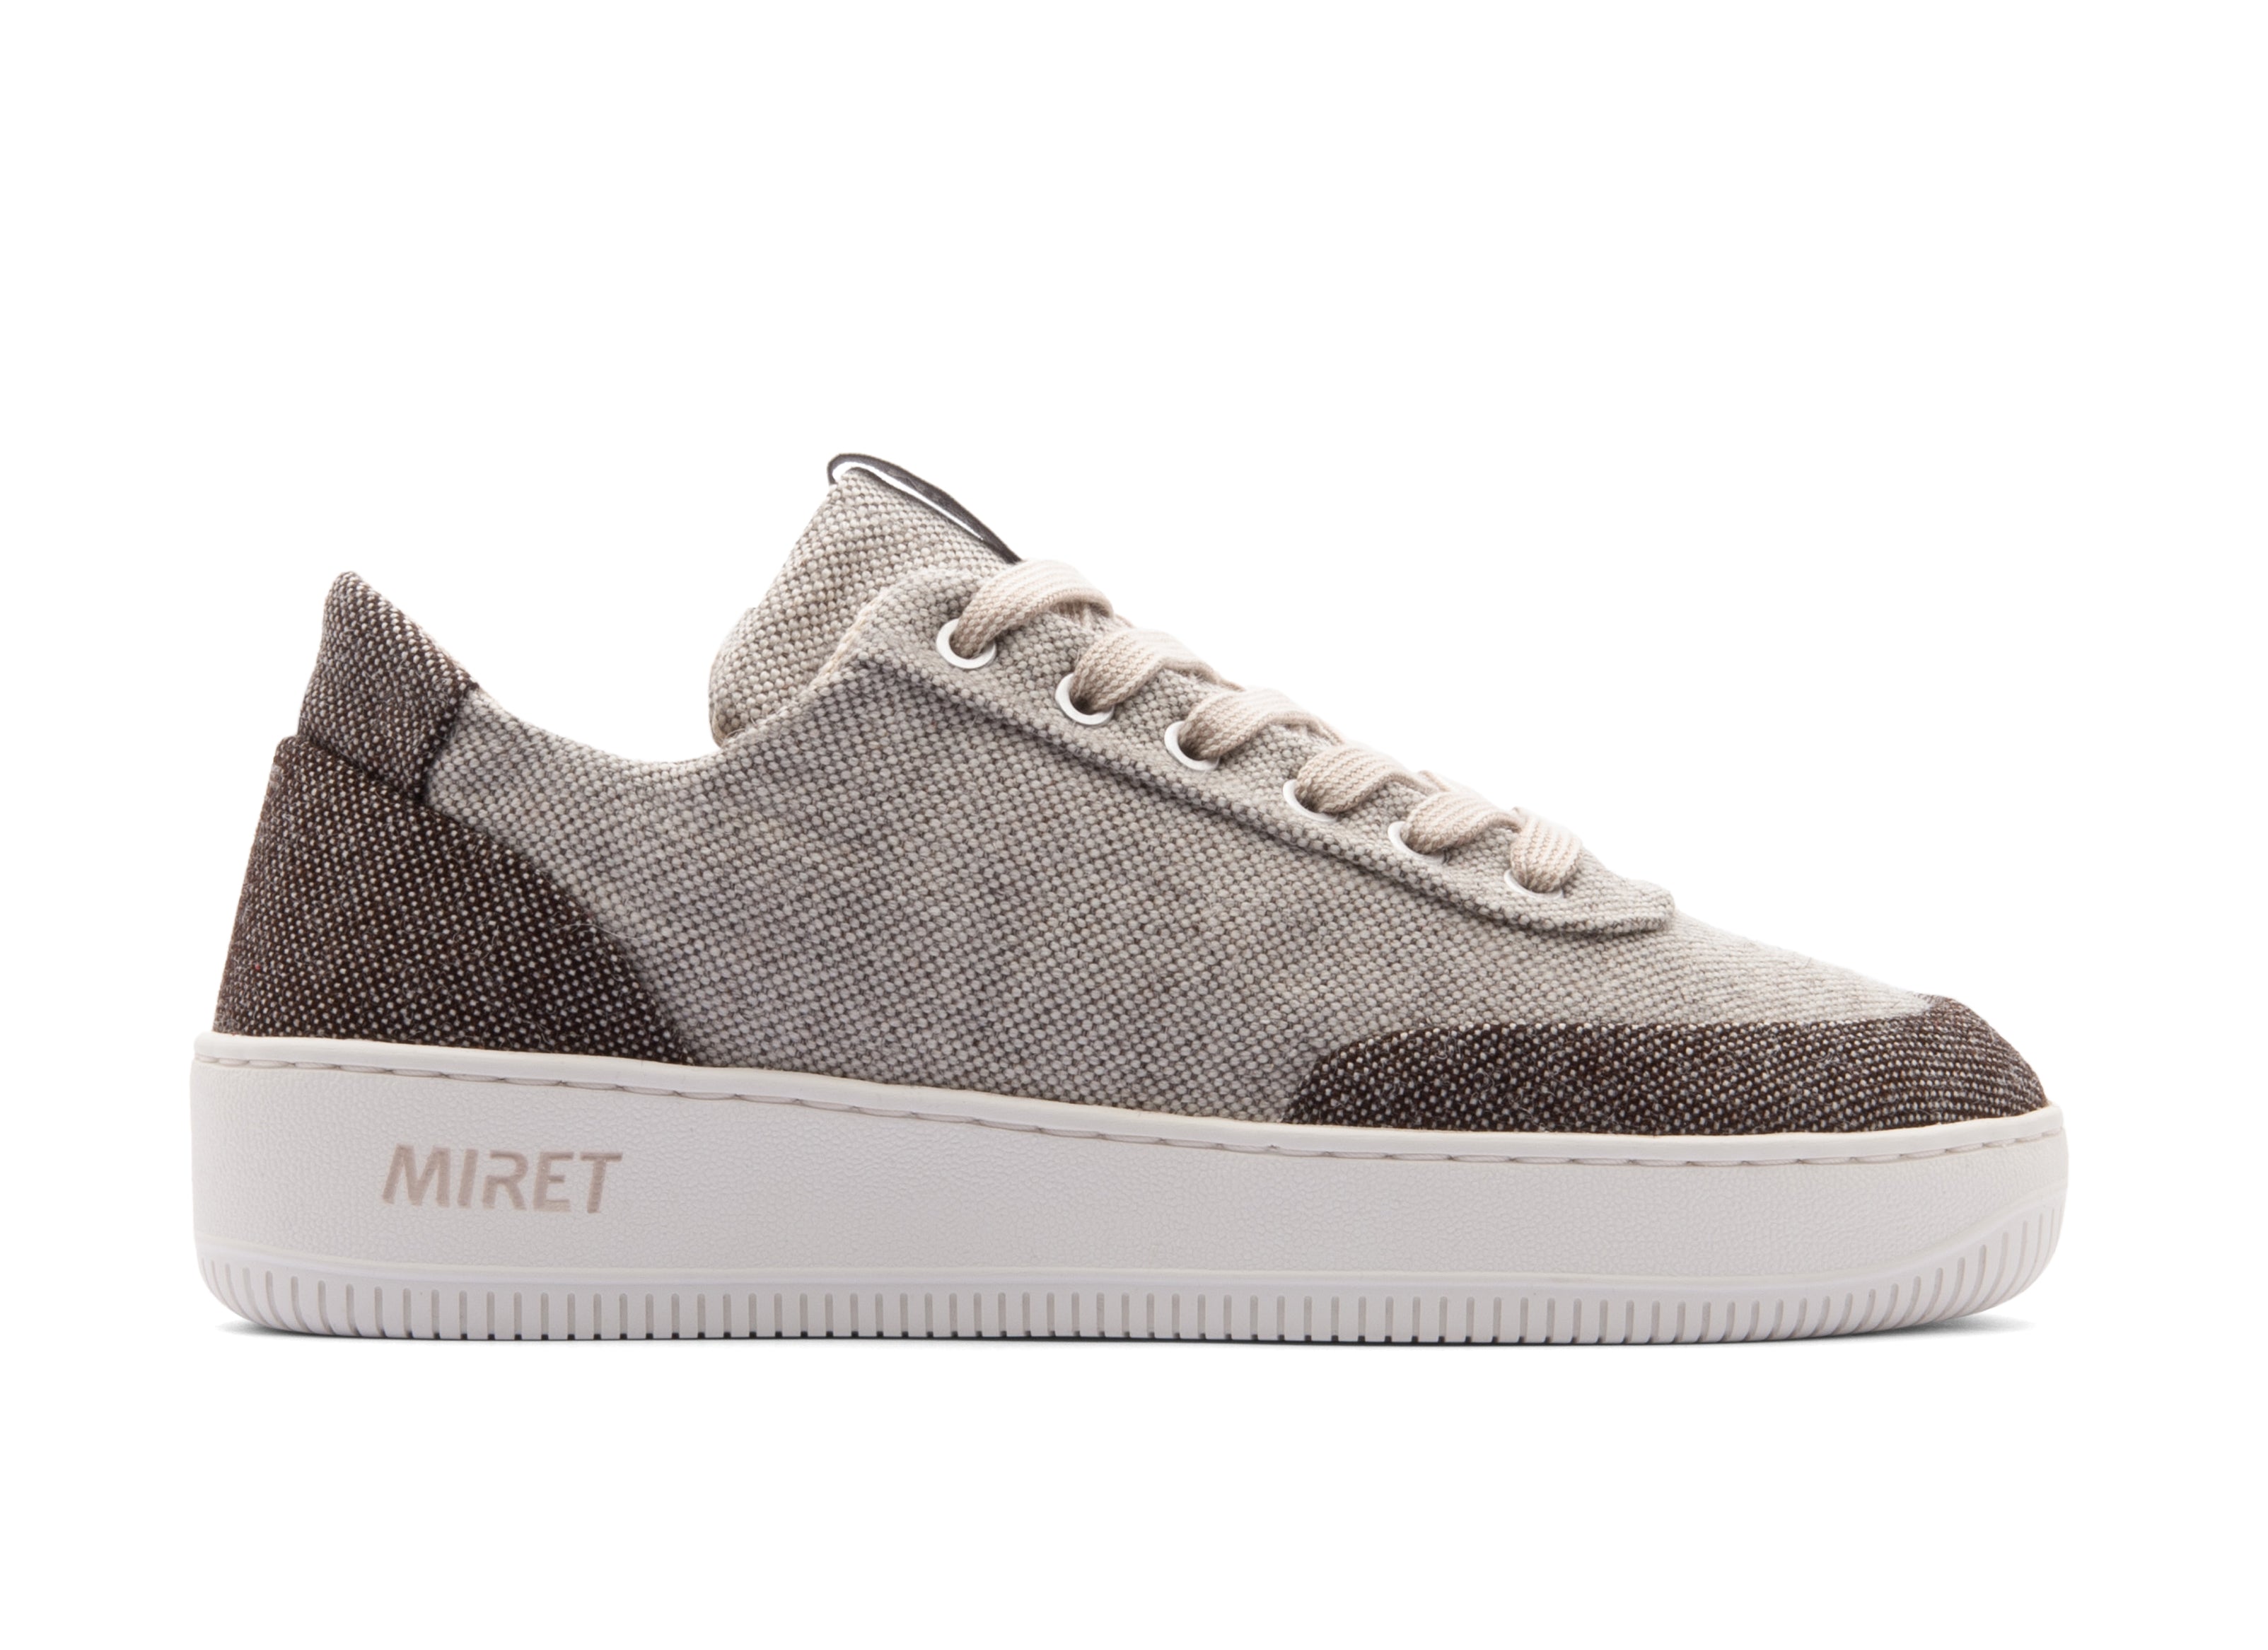 Low-top multicolored natural sneakers. Made from 100% thermoregulating and water-repellent wool with pure hemp lining, wool-covered cork insoles and super-flexible rubber outsoles. OEKO-TEX certified sneakers manufactured in the EU.